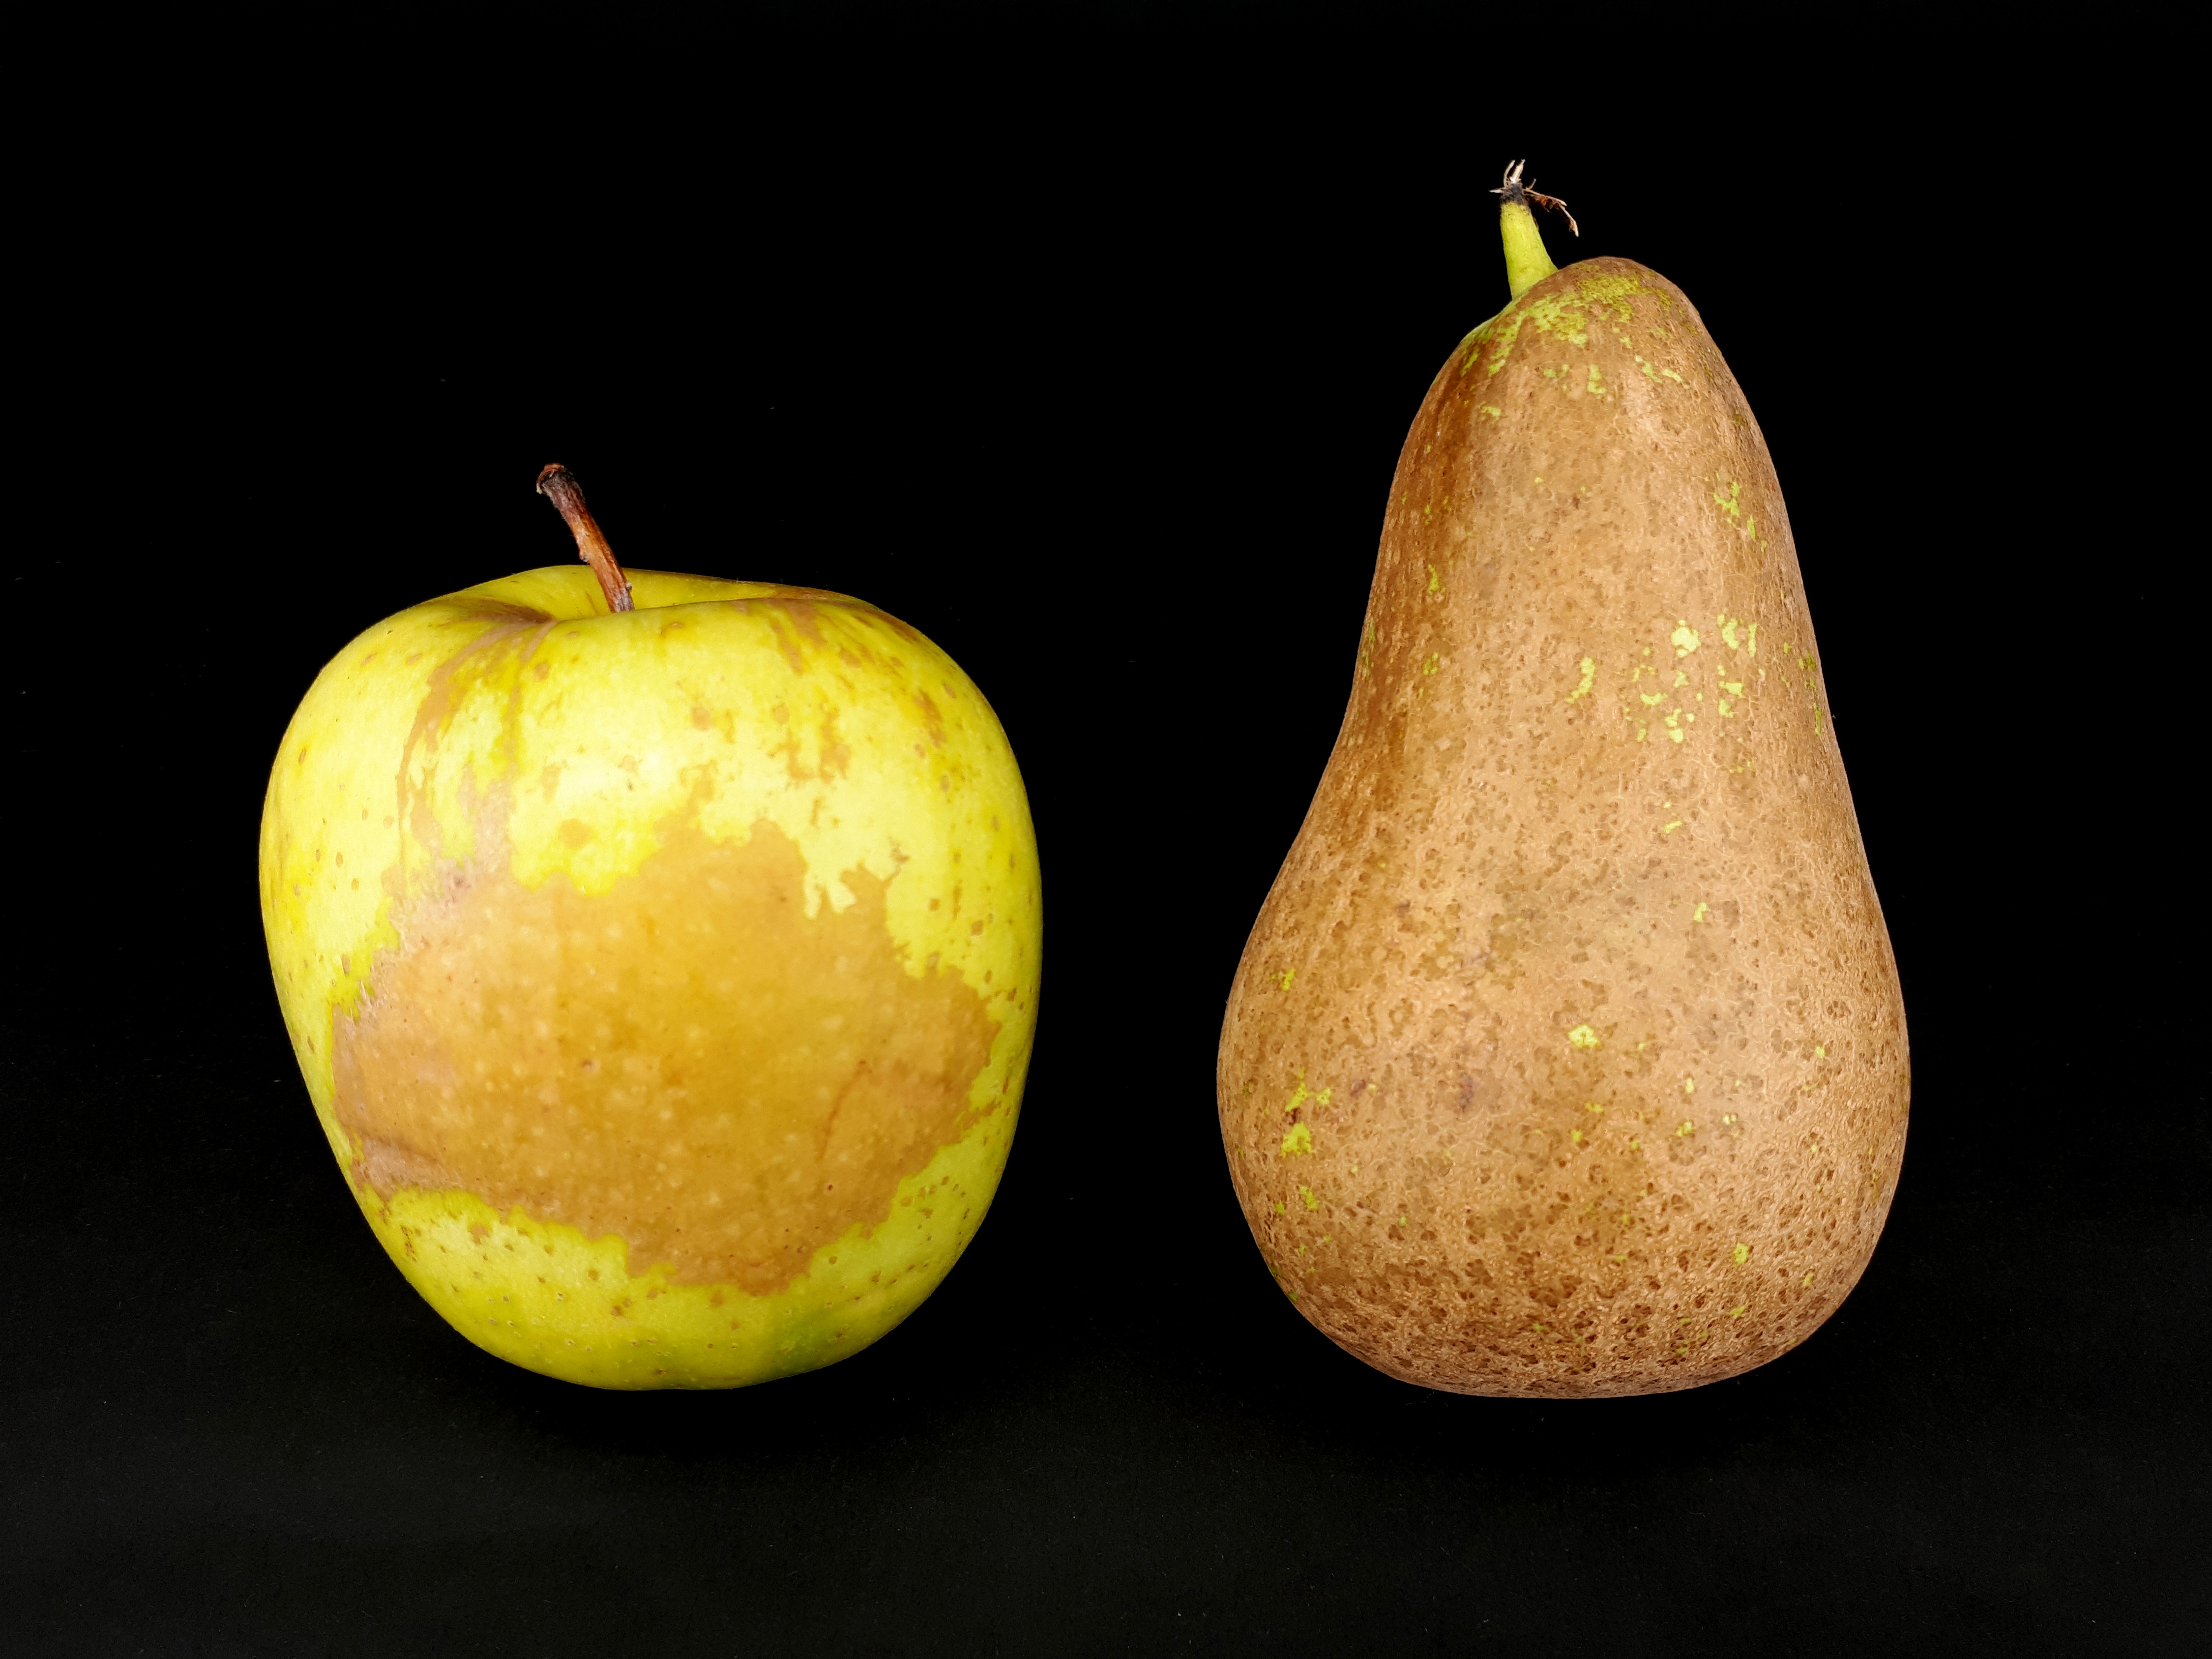 2 x Russetted fruit - Apple - Pear - 2017 C2